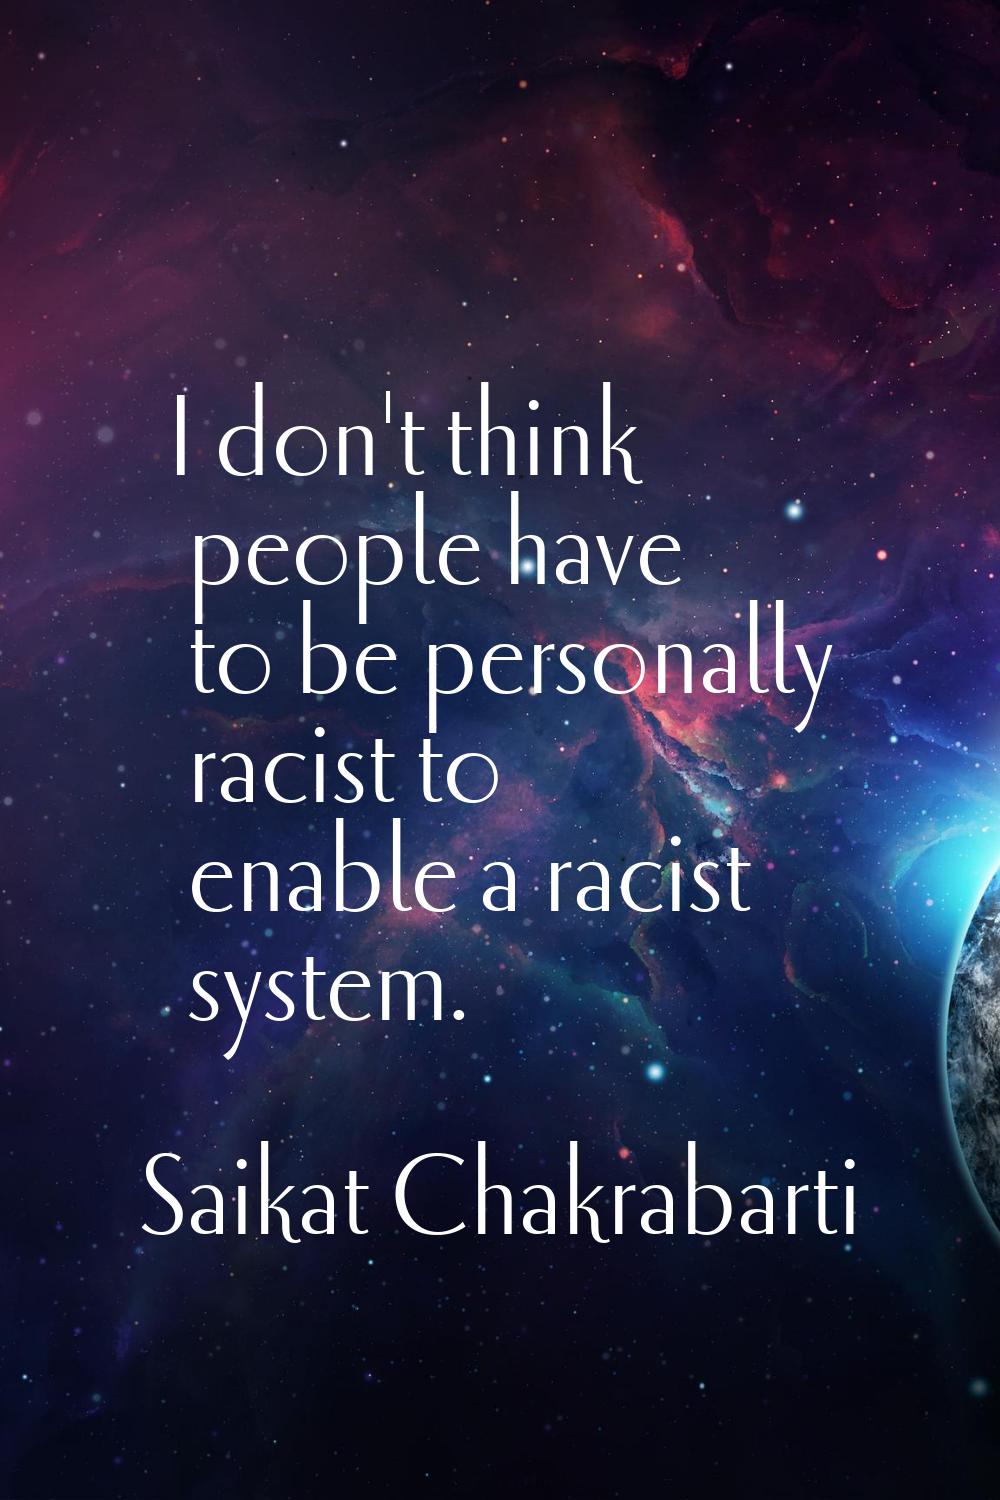 I don't think people have to be personally racist to enable a racist system.